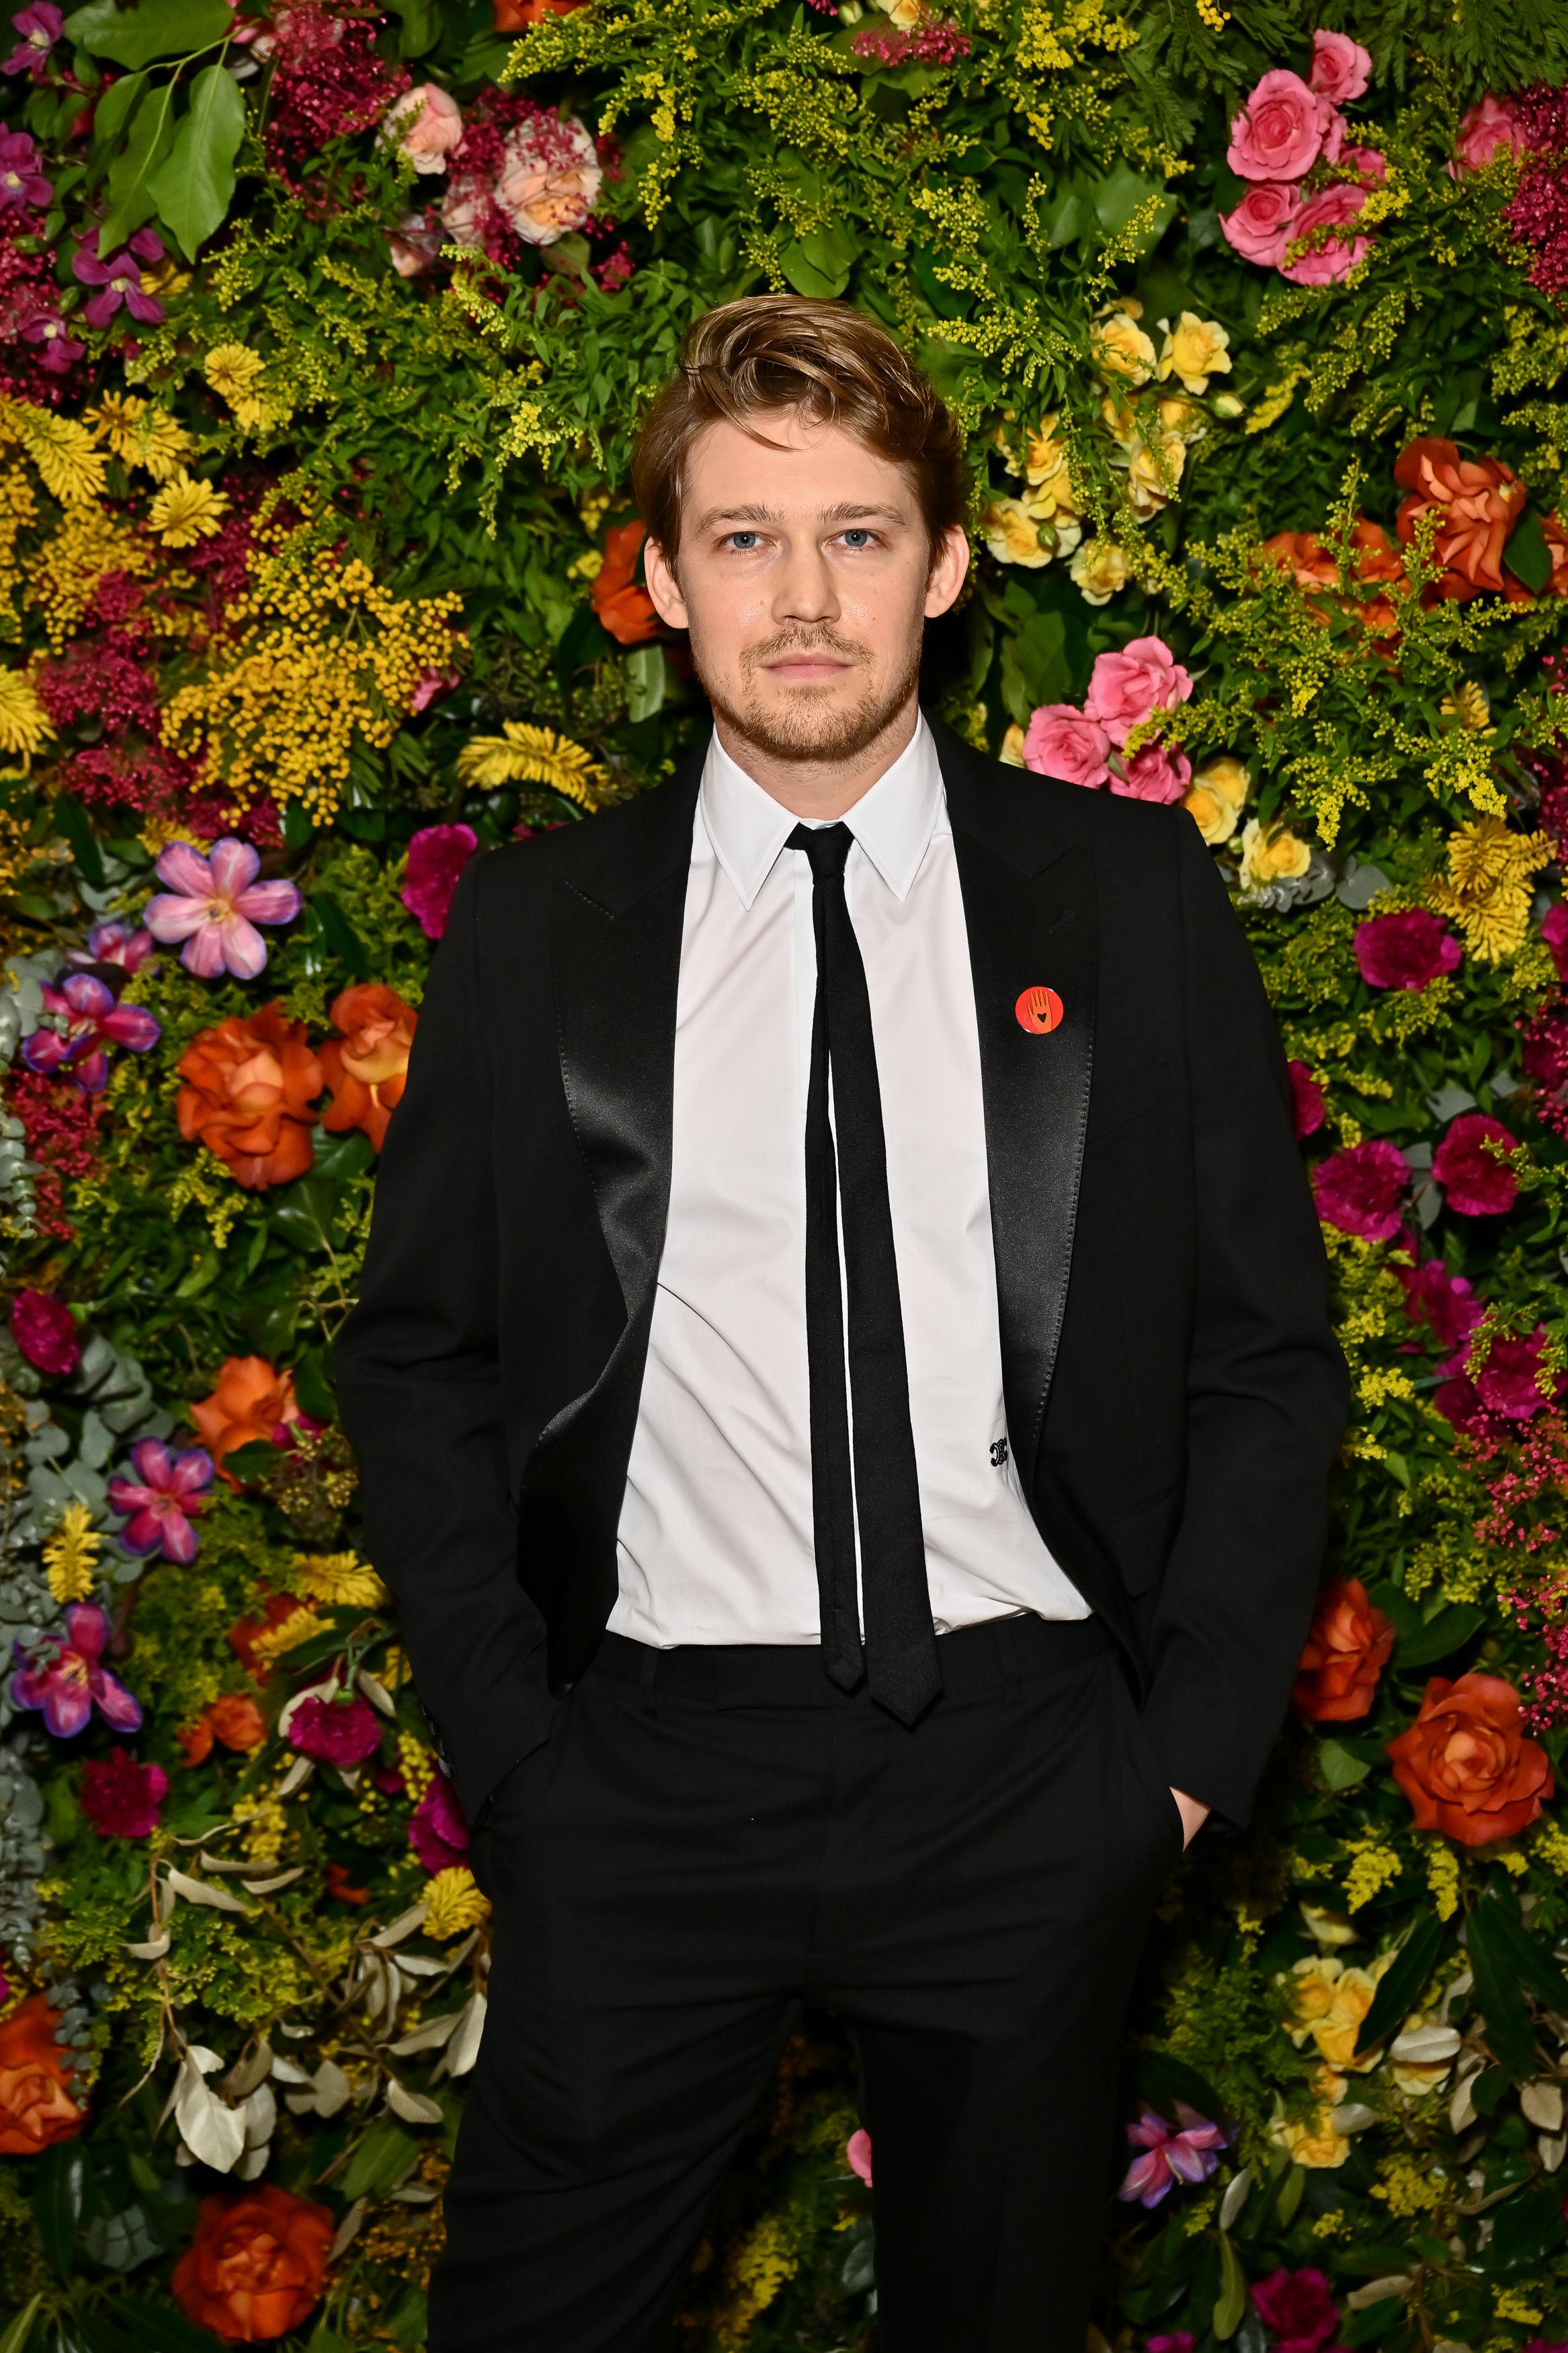 Joe Alwyn standing in front of a floral backdrop, wearing a black suit and tie with a red lapel pin